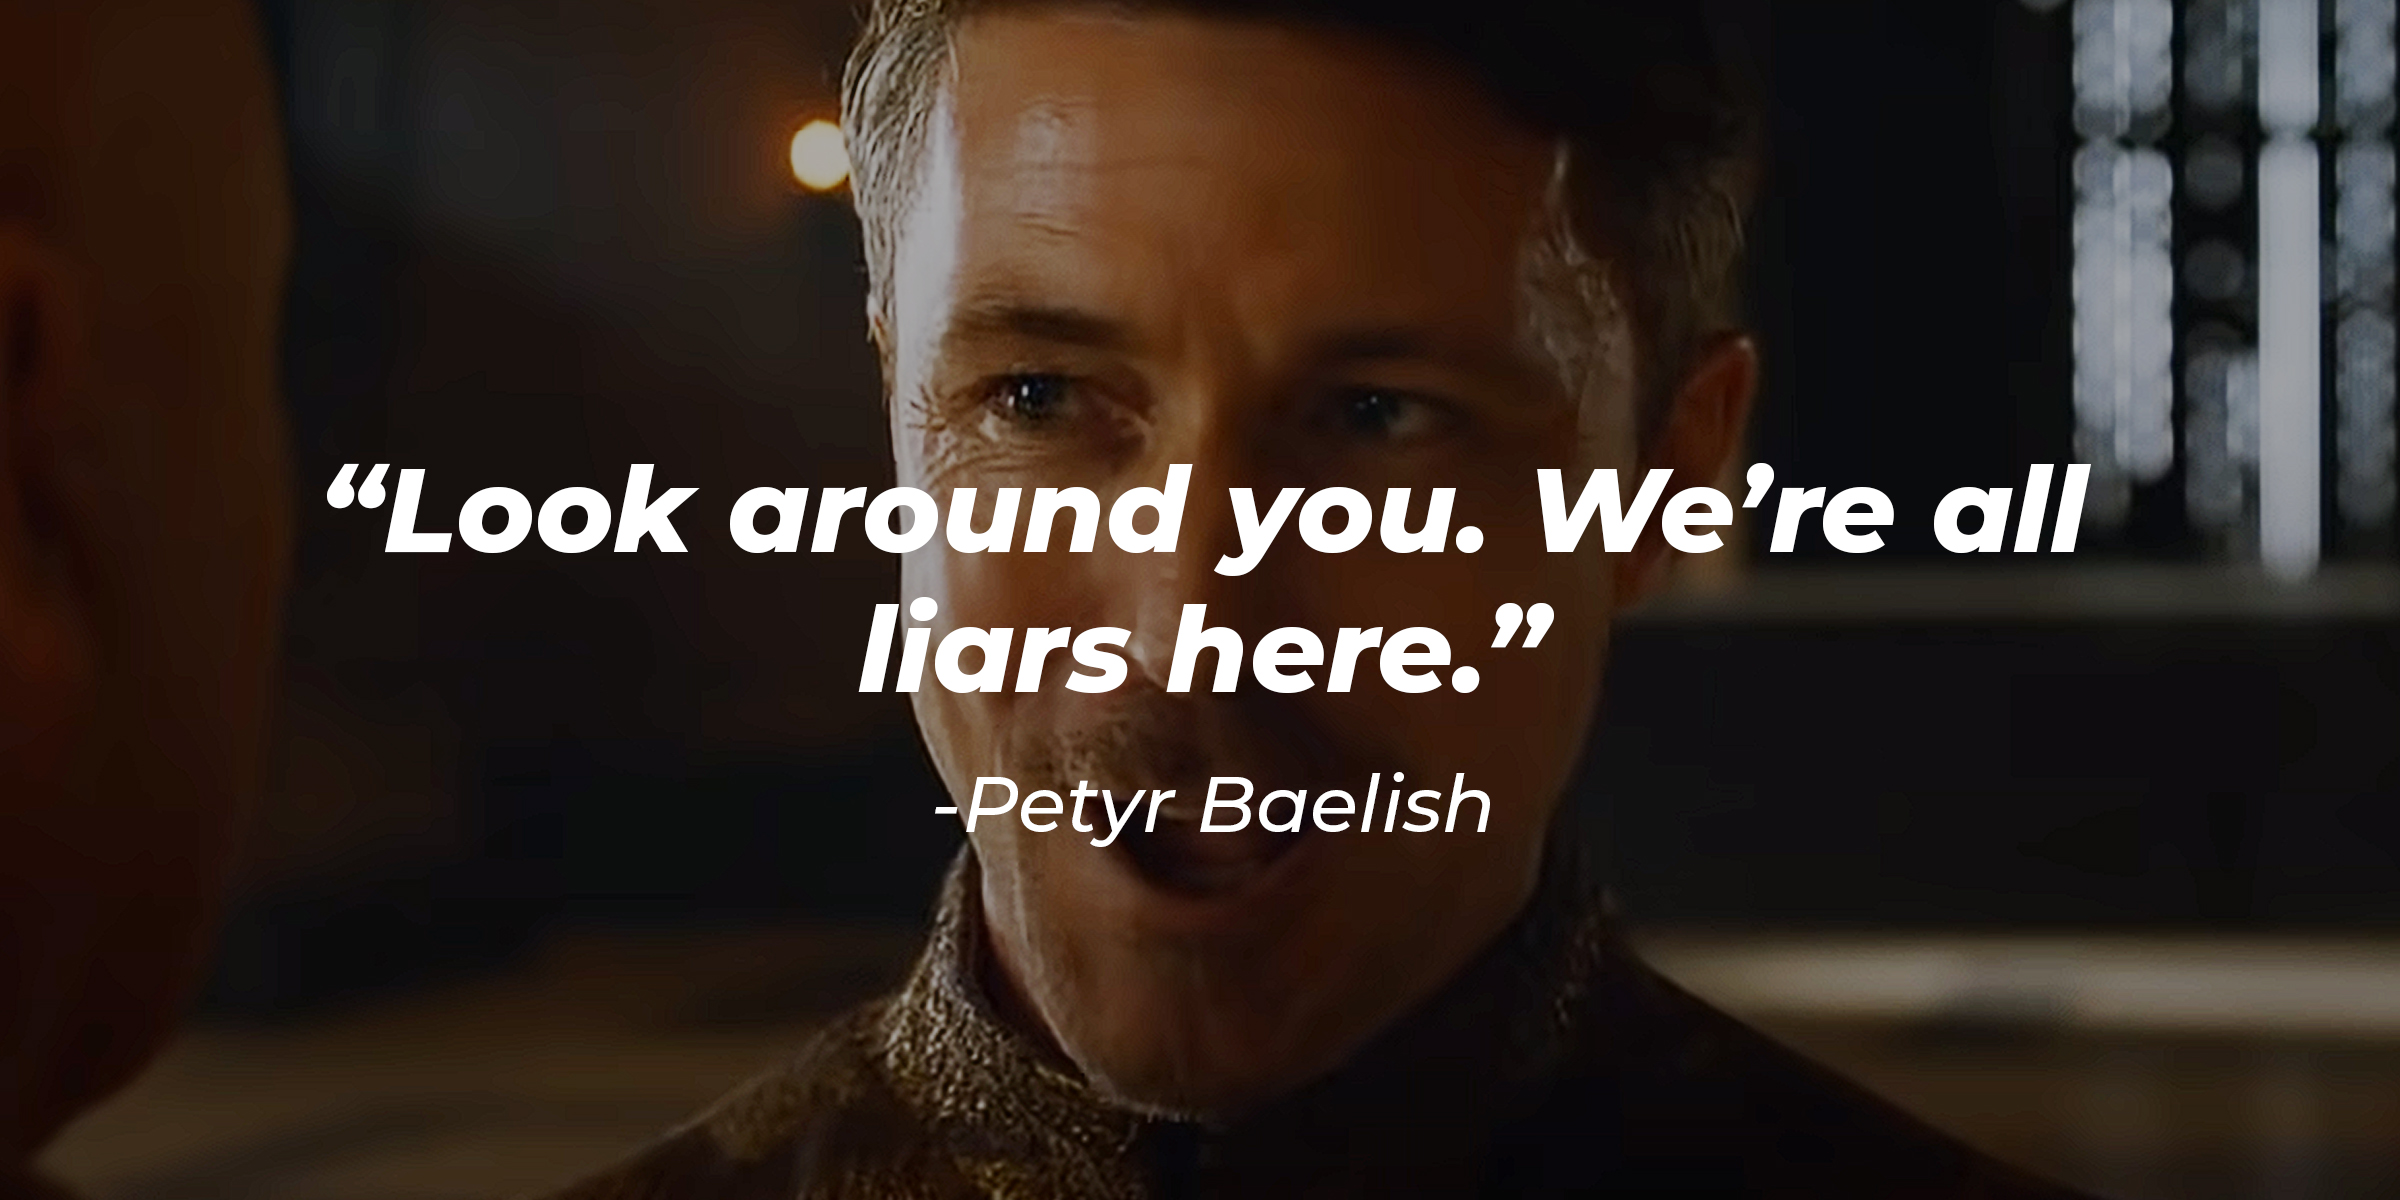 Petyr Baelish, with his quote: “Look around you. We're all liars here.” | Source: Youtube.com/gameofthrones